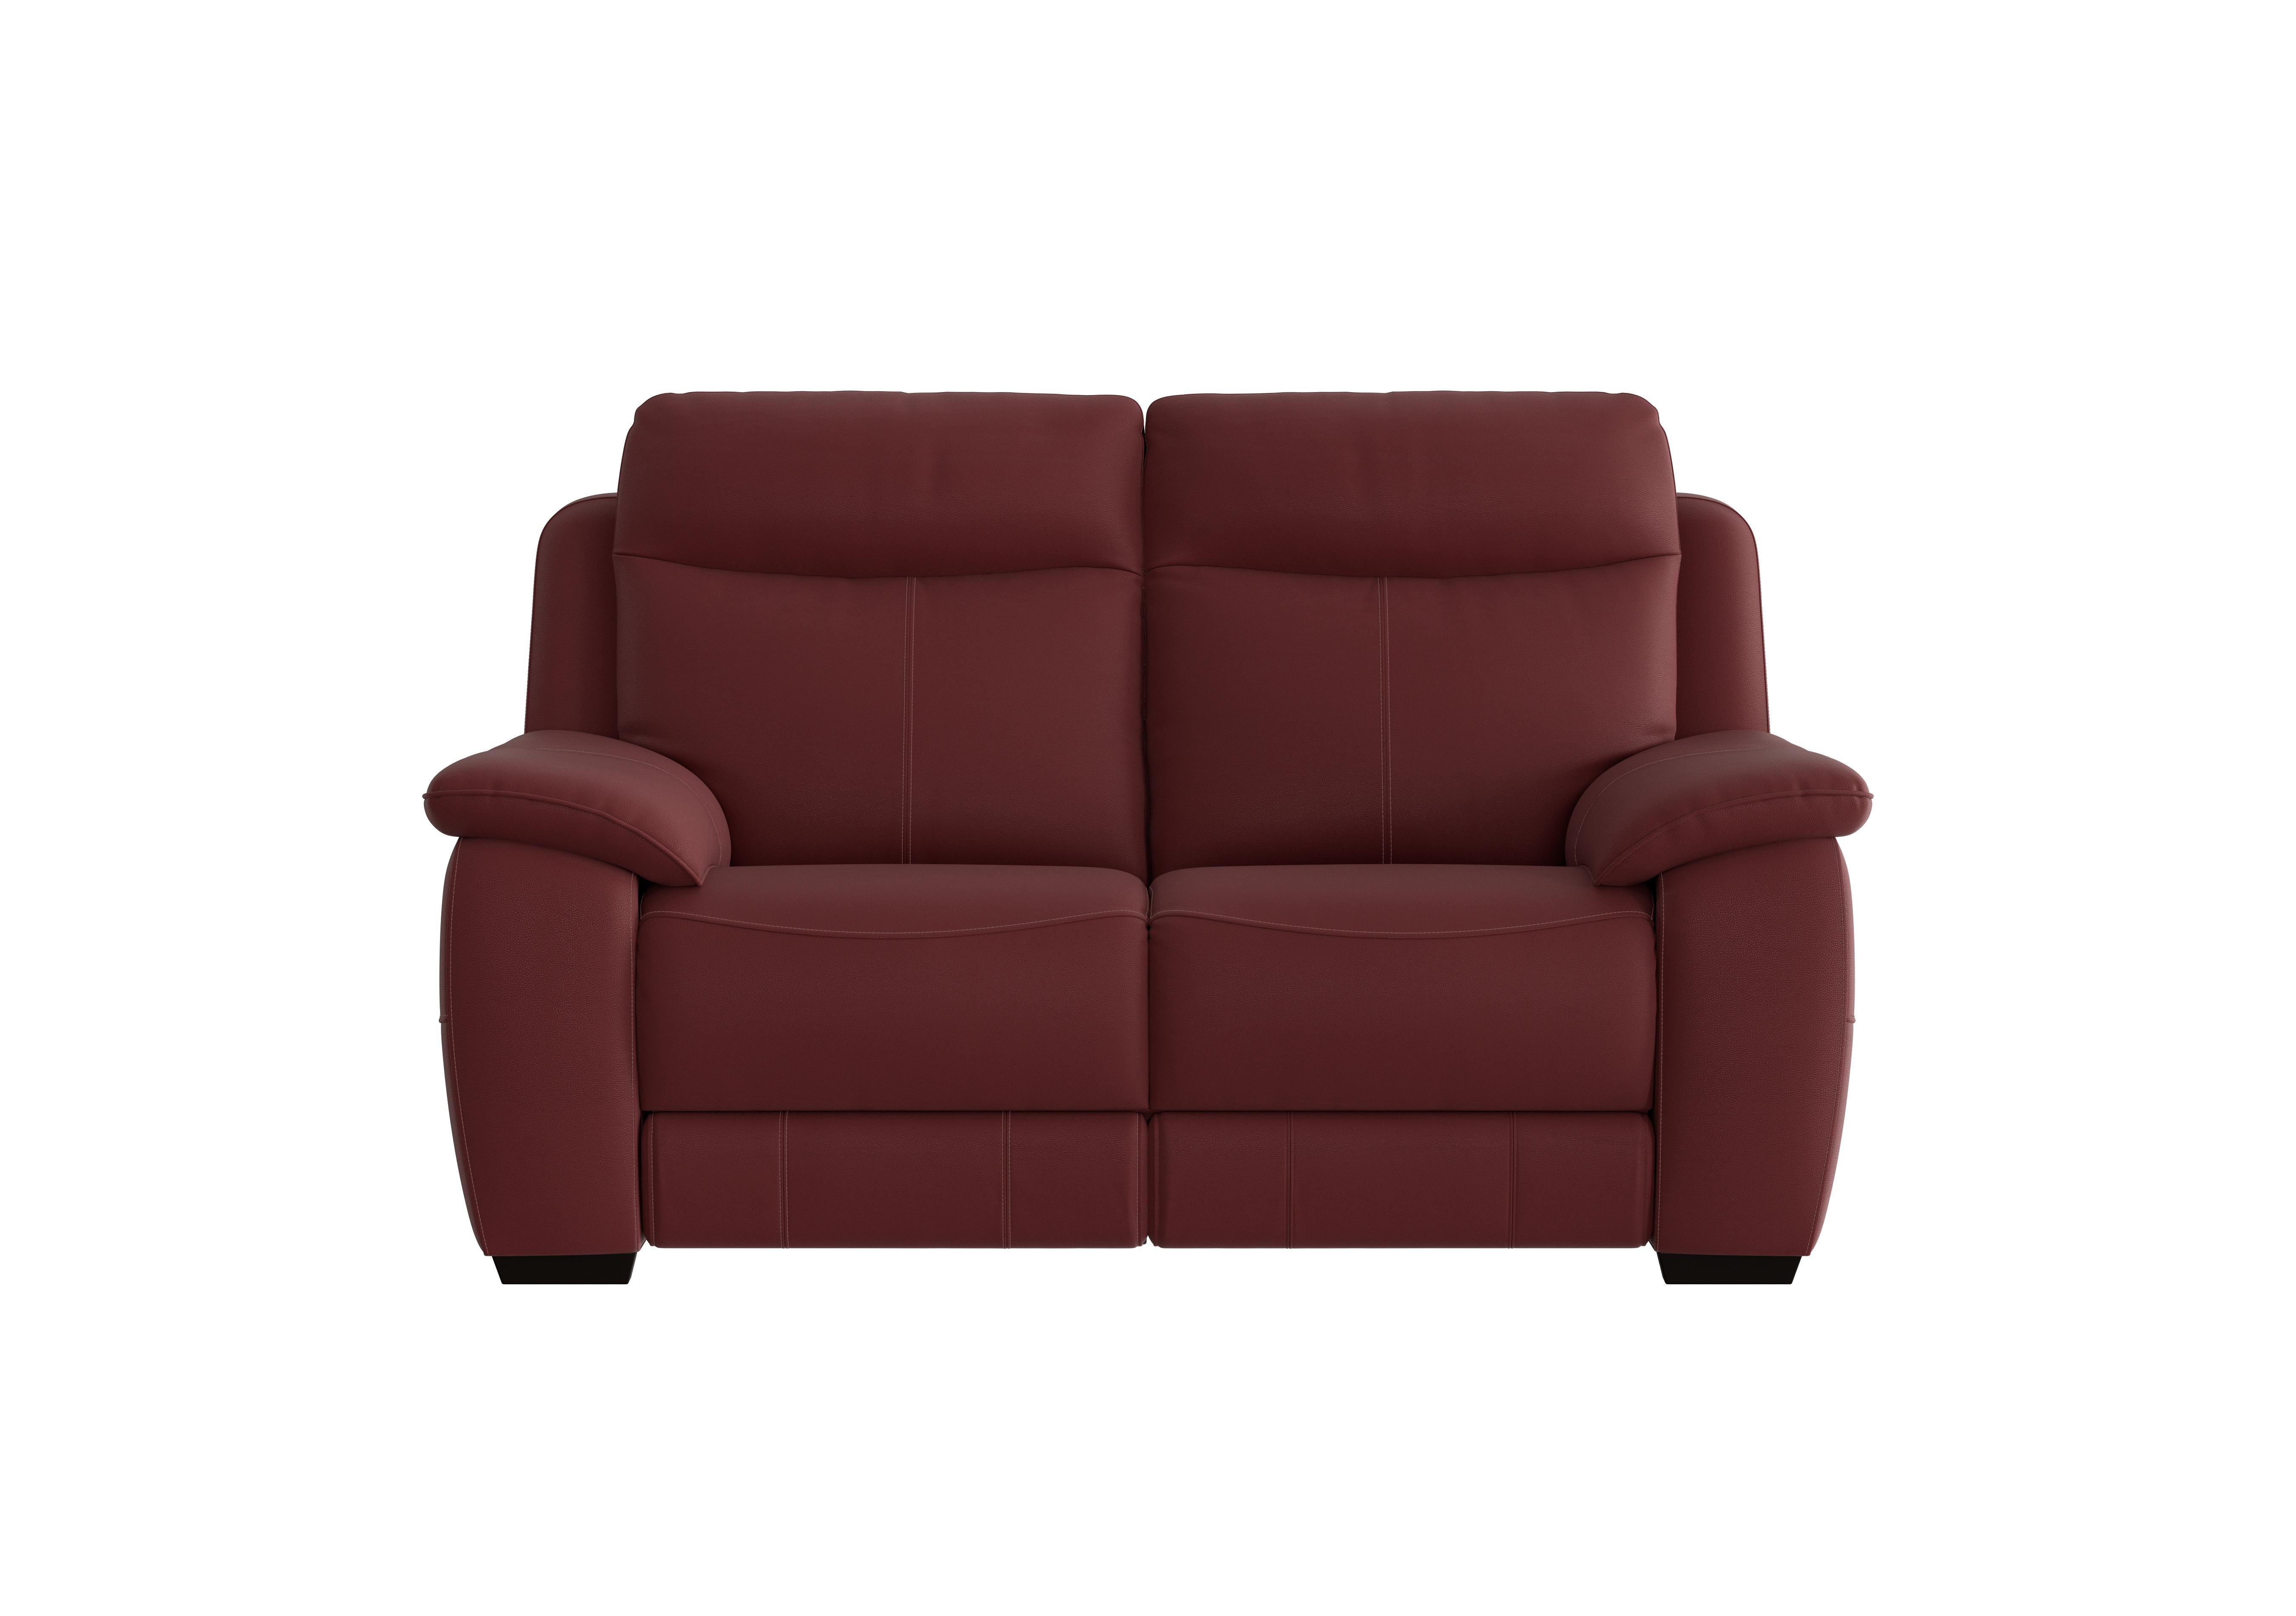 Starlight Express 2 Seater Leather Sofa in Bv-035c Deep Red on Furniture Village